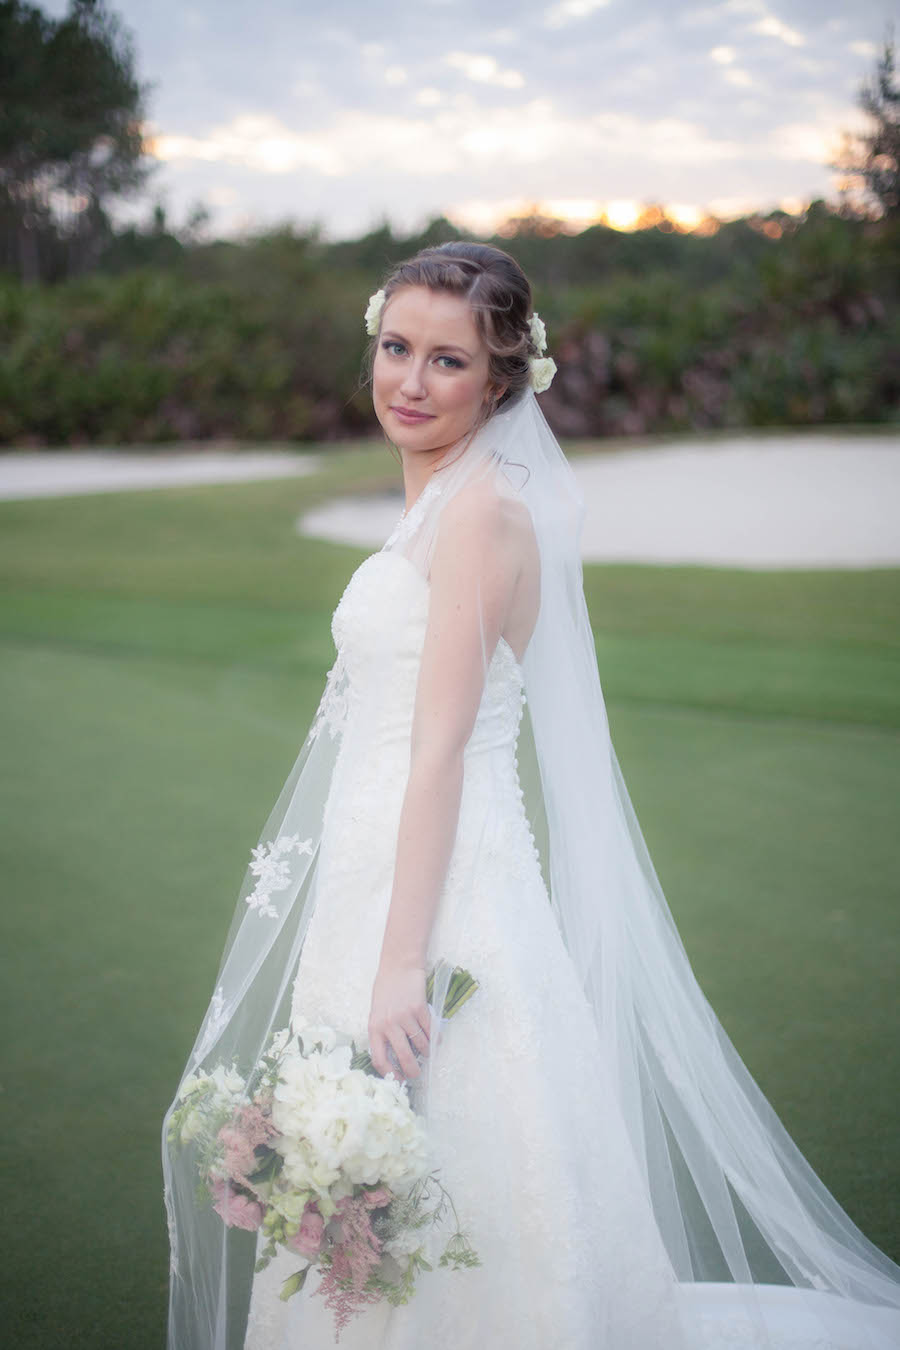 Bridal Wedding Portrait in Ivory Alfred Angelo Wedding Dress with Lace Overlay and Ivory and Pink Floral Wedding Bouquet with Roses and Hydrangeas | Tampa Wedding Floral Designer Northside Florist | Tampa Country Club Wedding Venue Hunter's Green Country Club